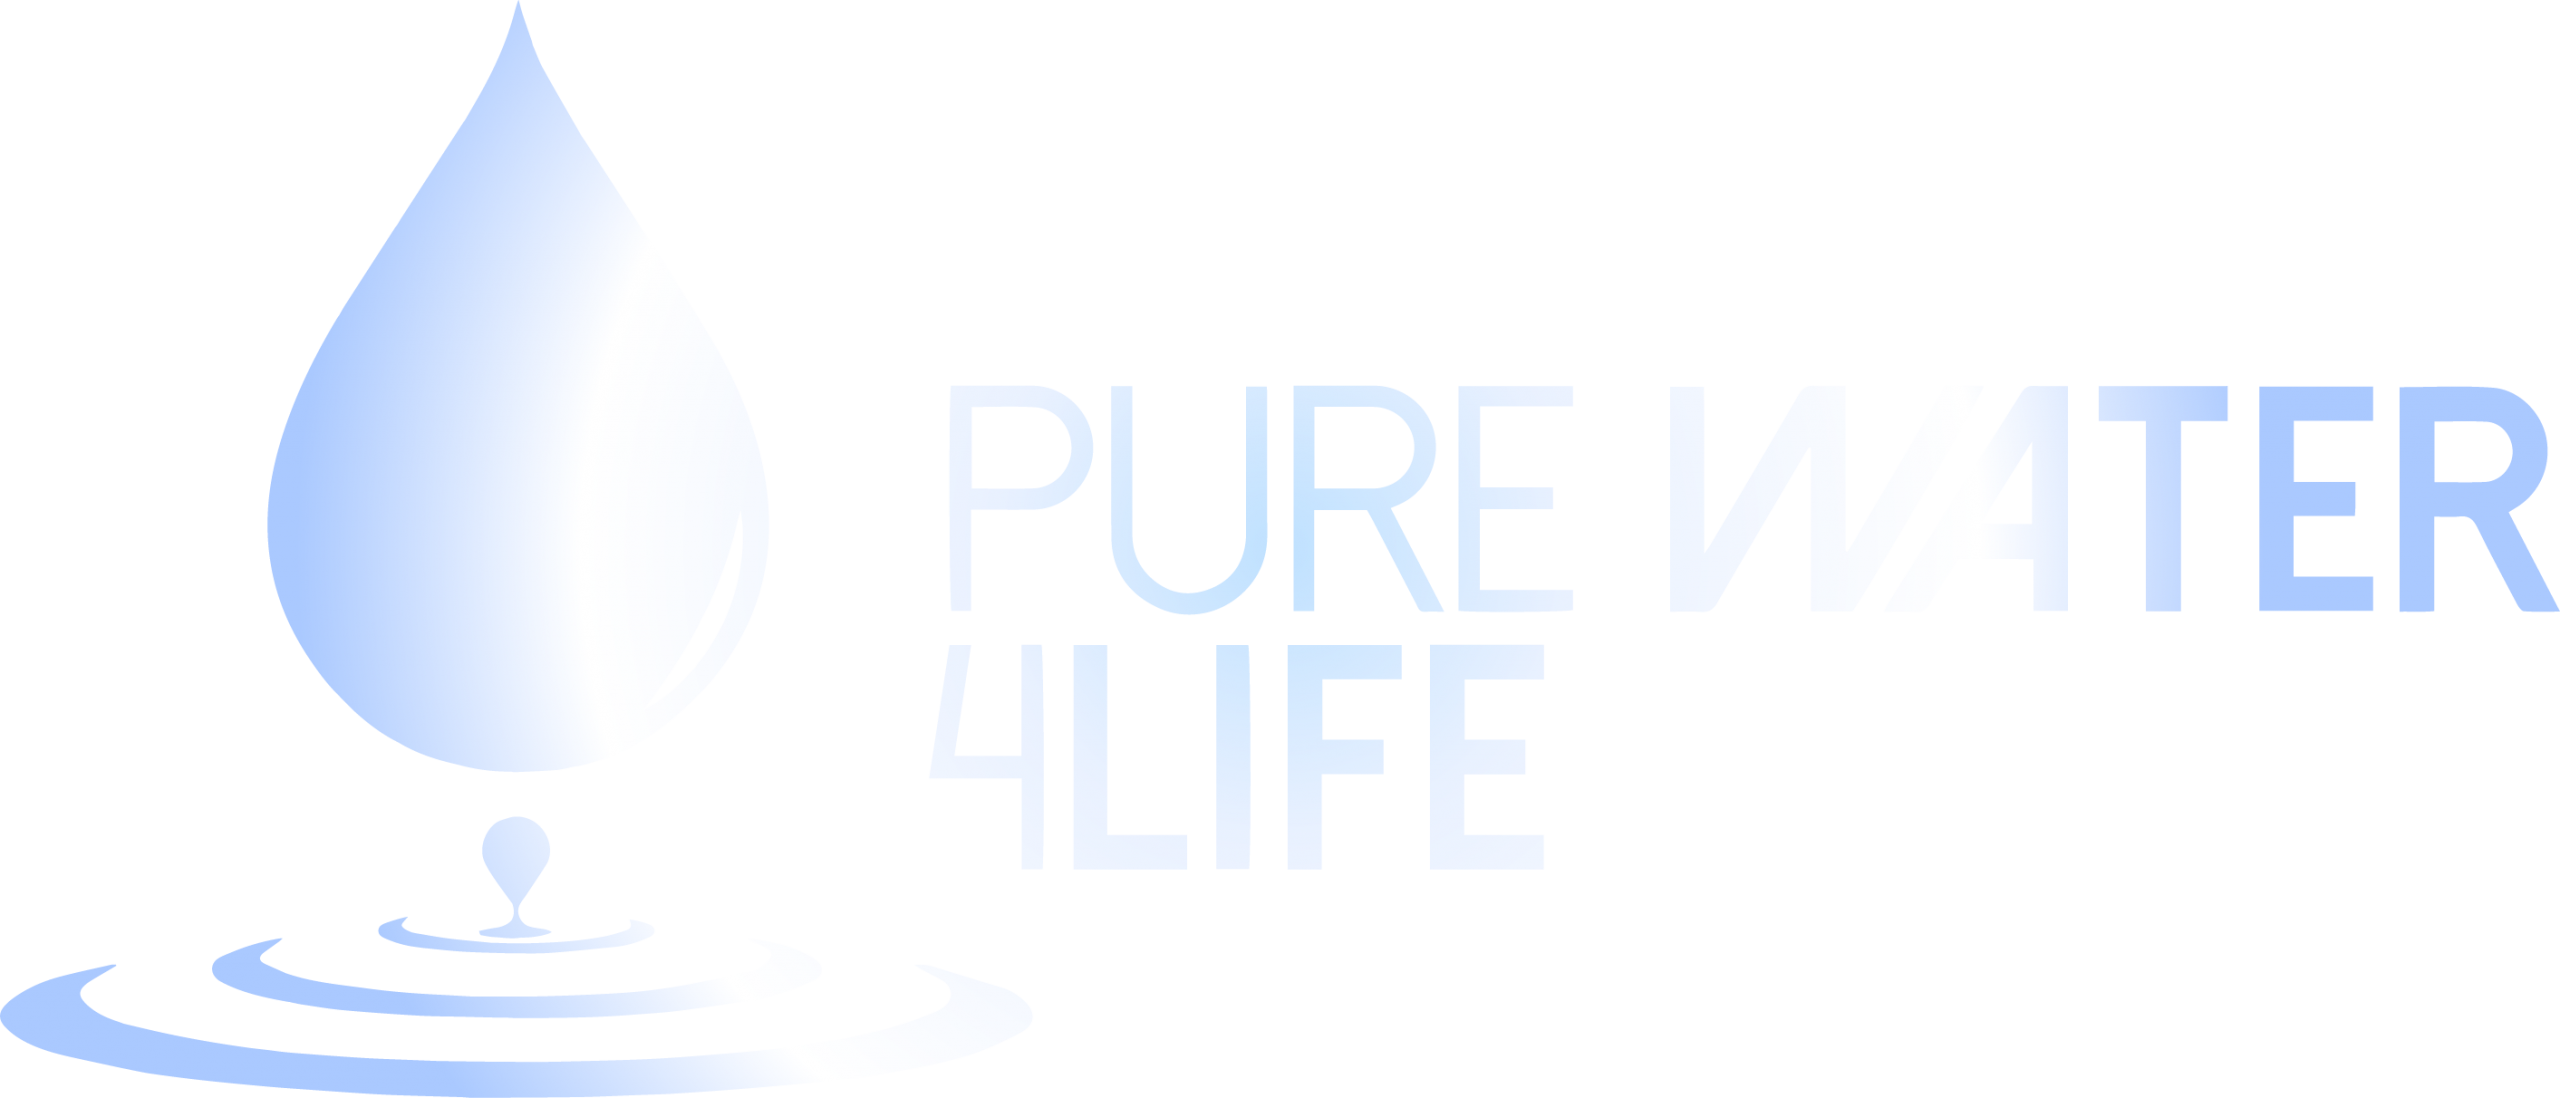 Pure Water 4Life